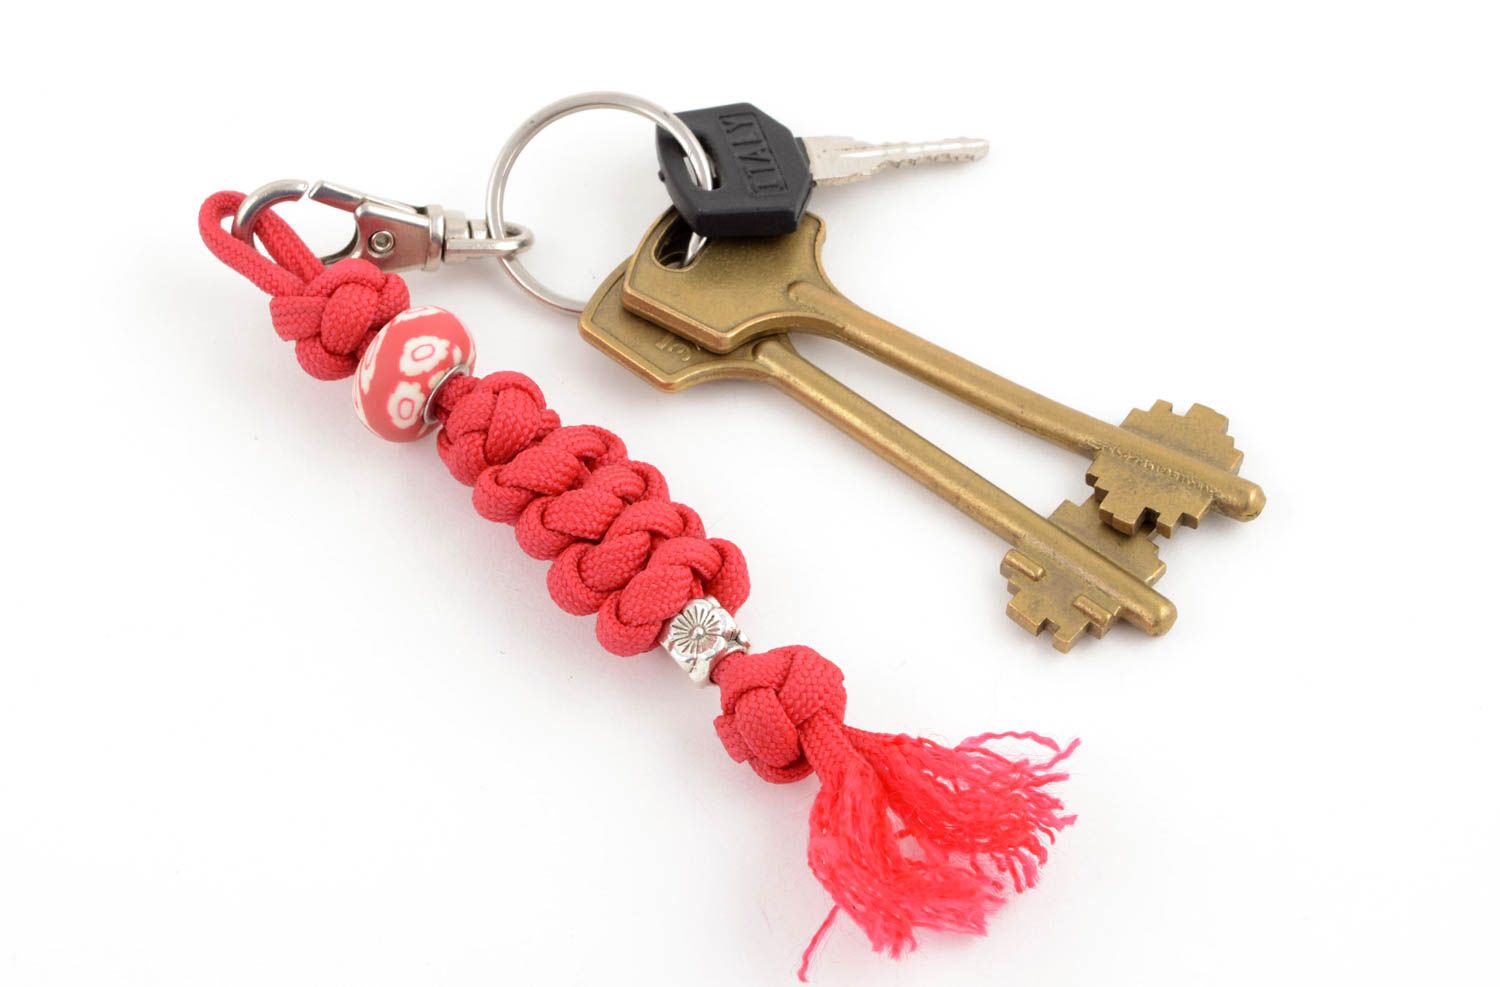 Handmade paracord keychain cool keychains key rings travel supplies cool gifts photo 4